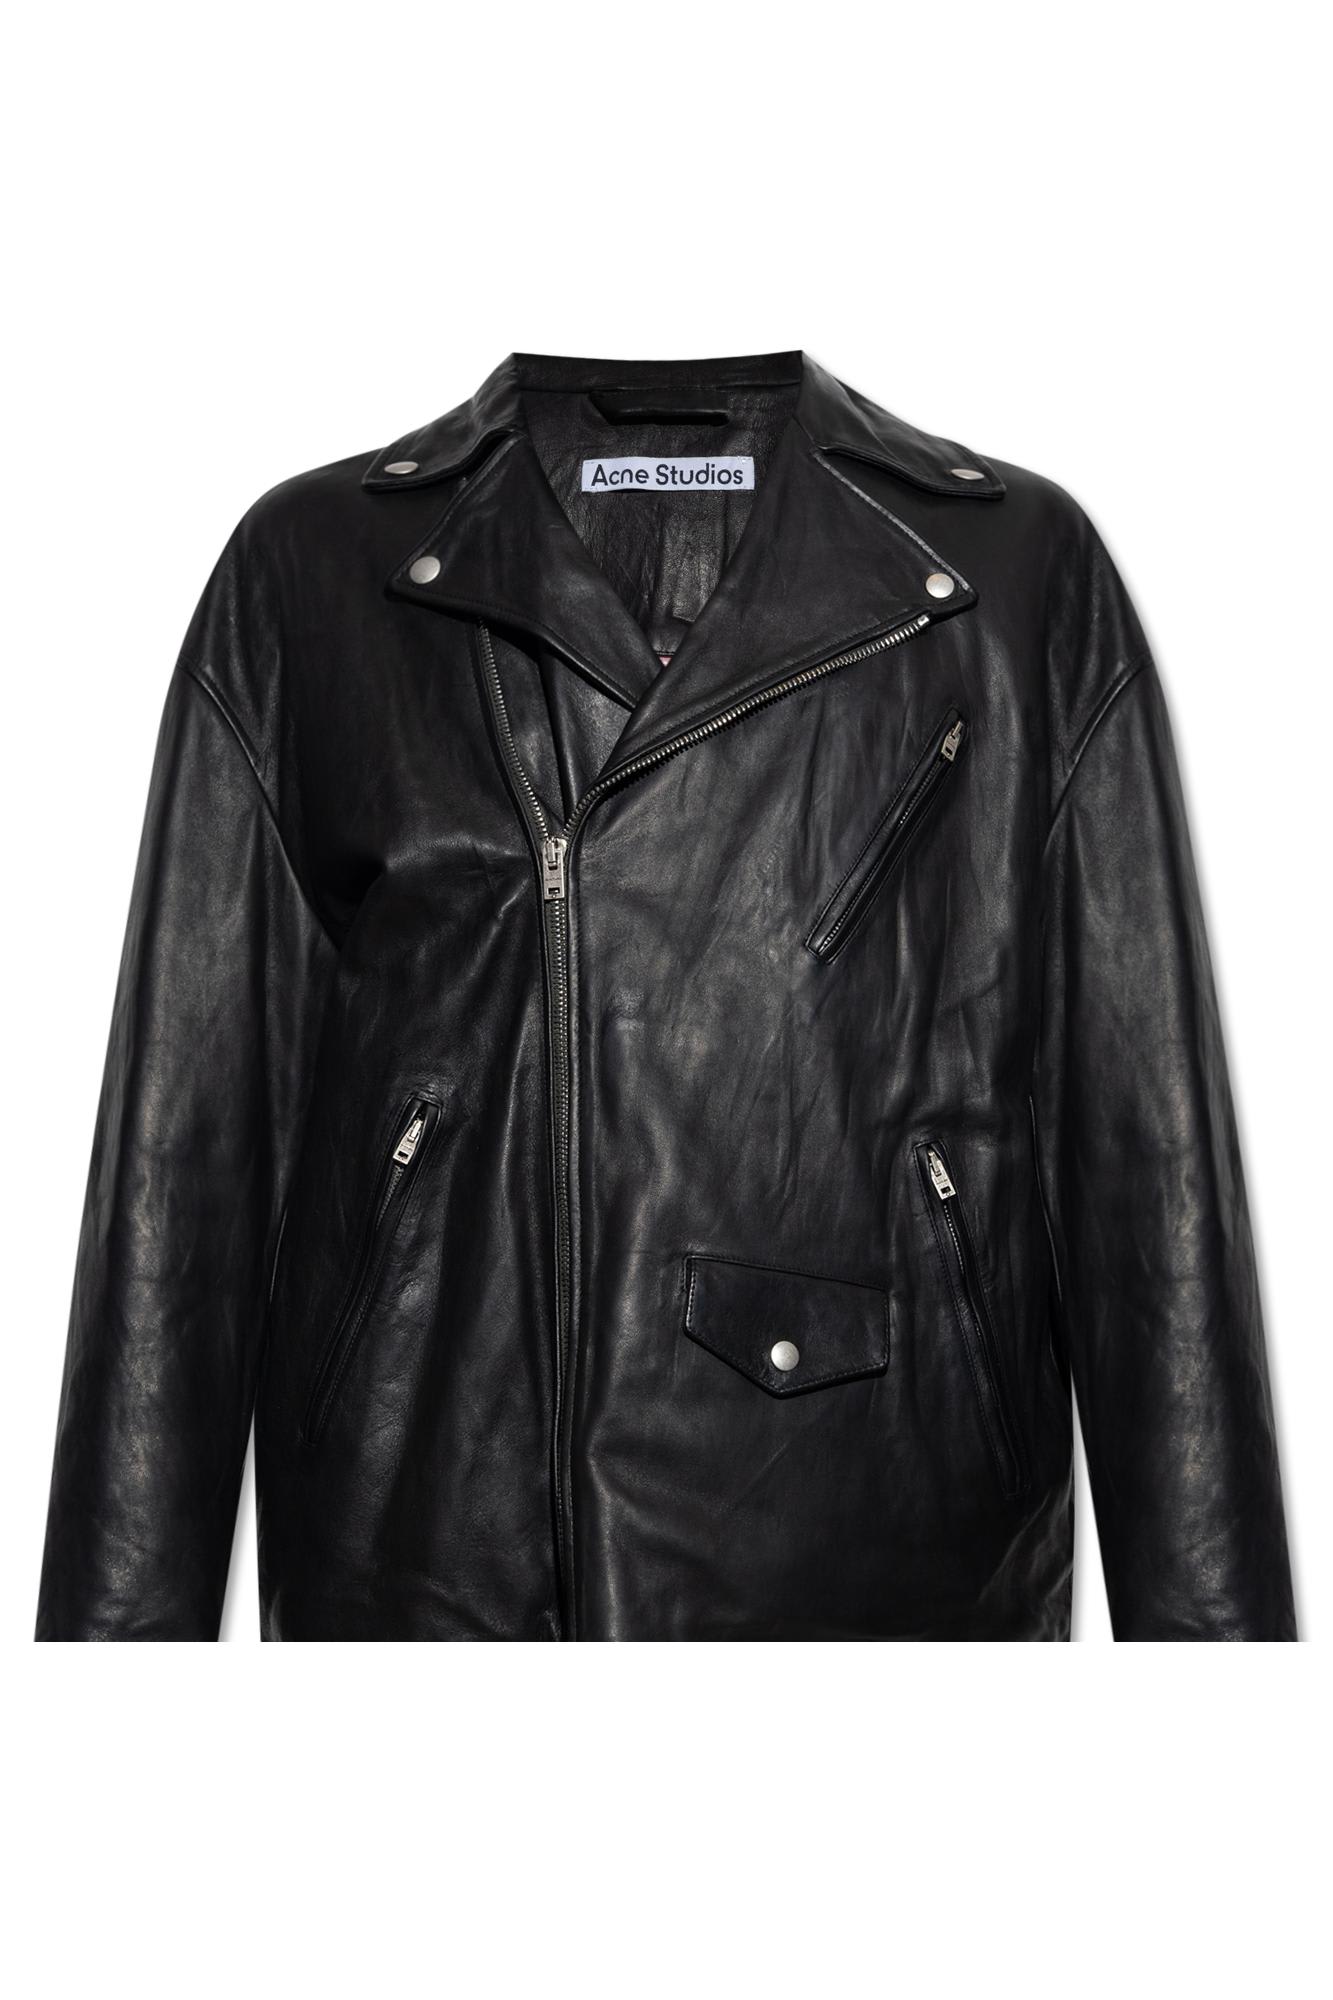 ACNE STUDIOS LEATHER JACKET IN BLACK LEATHER